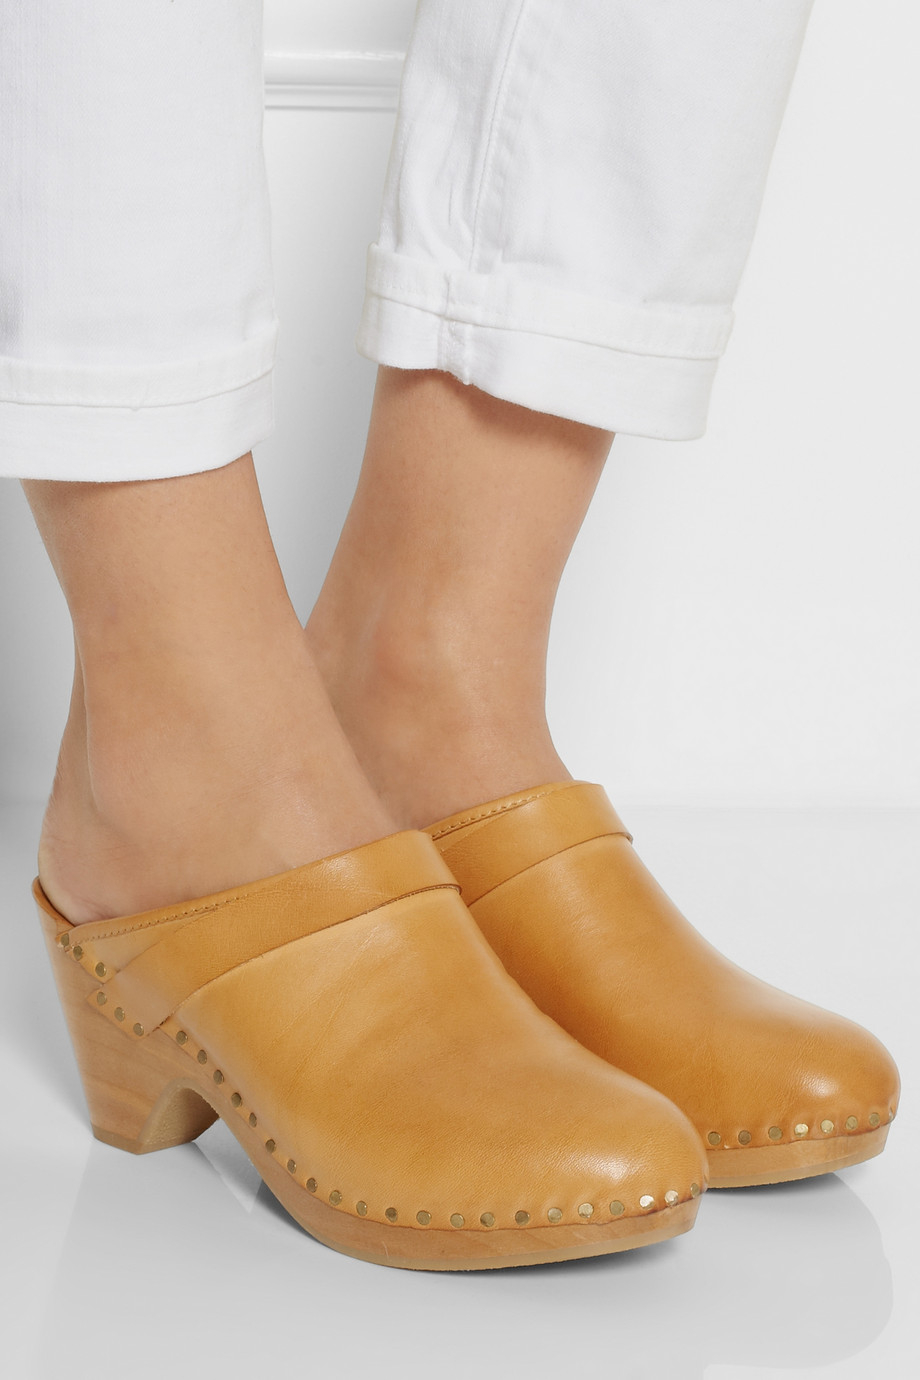 Isabel Marant Towson Leather and Wooden Clogs in Orange - Lyst